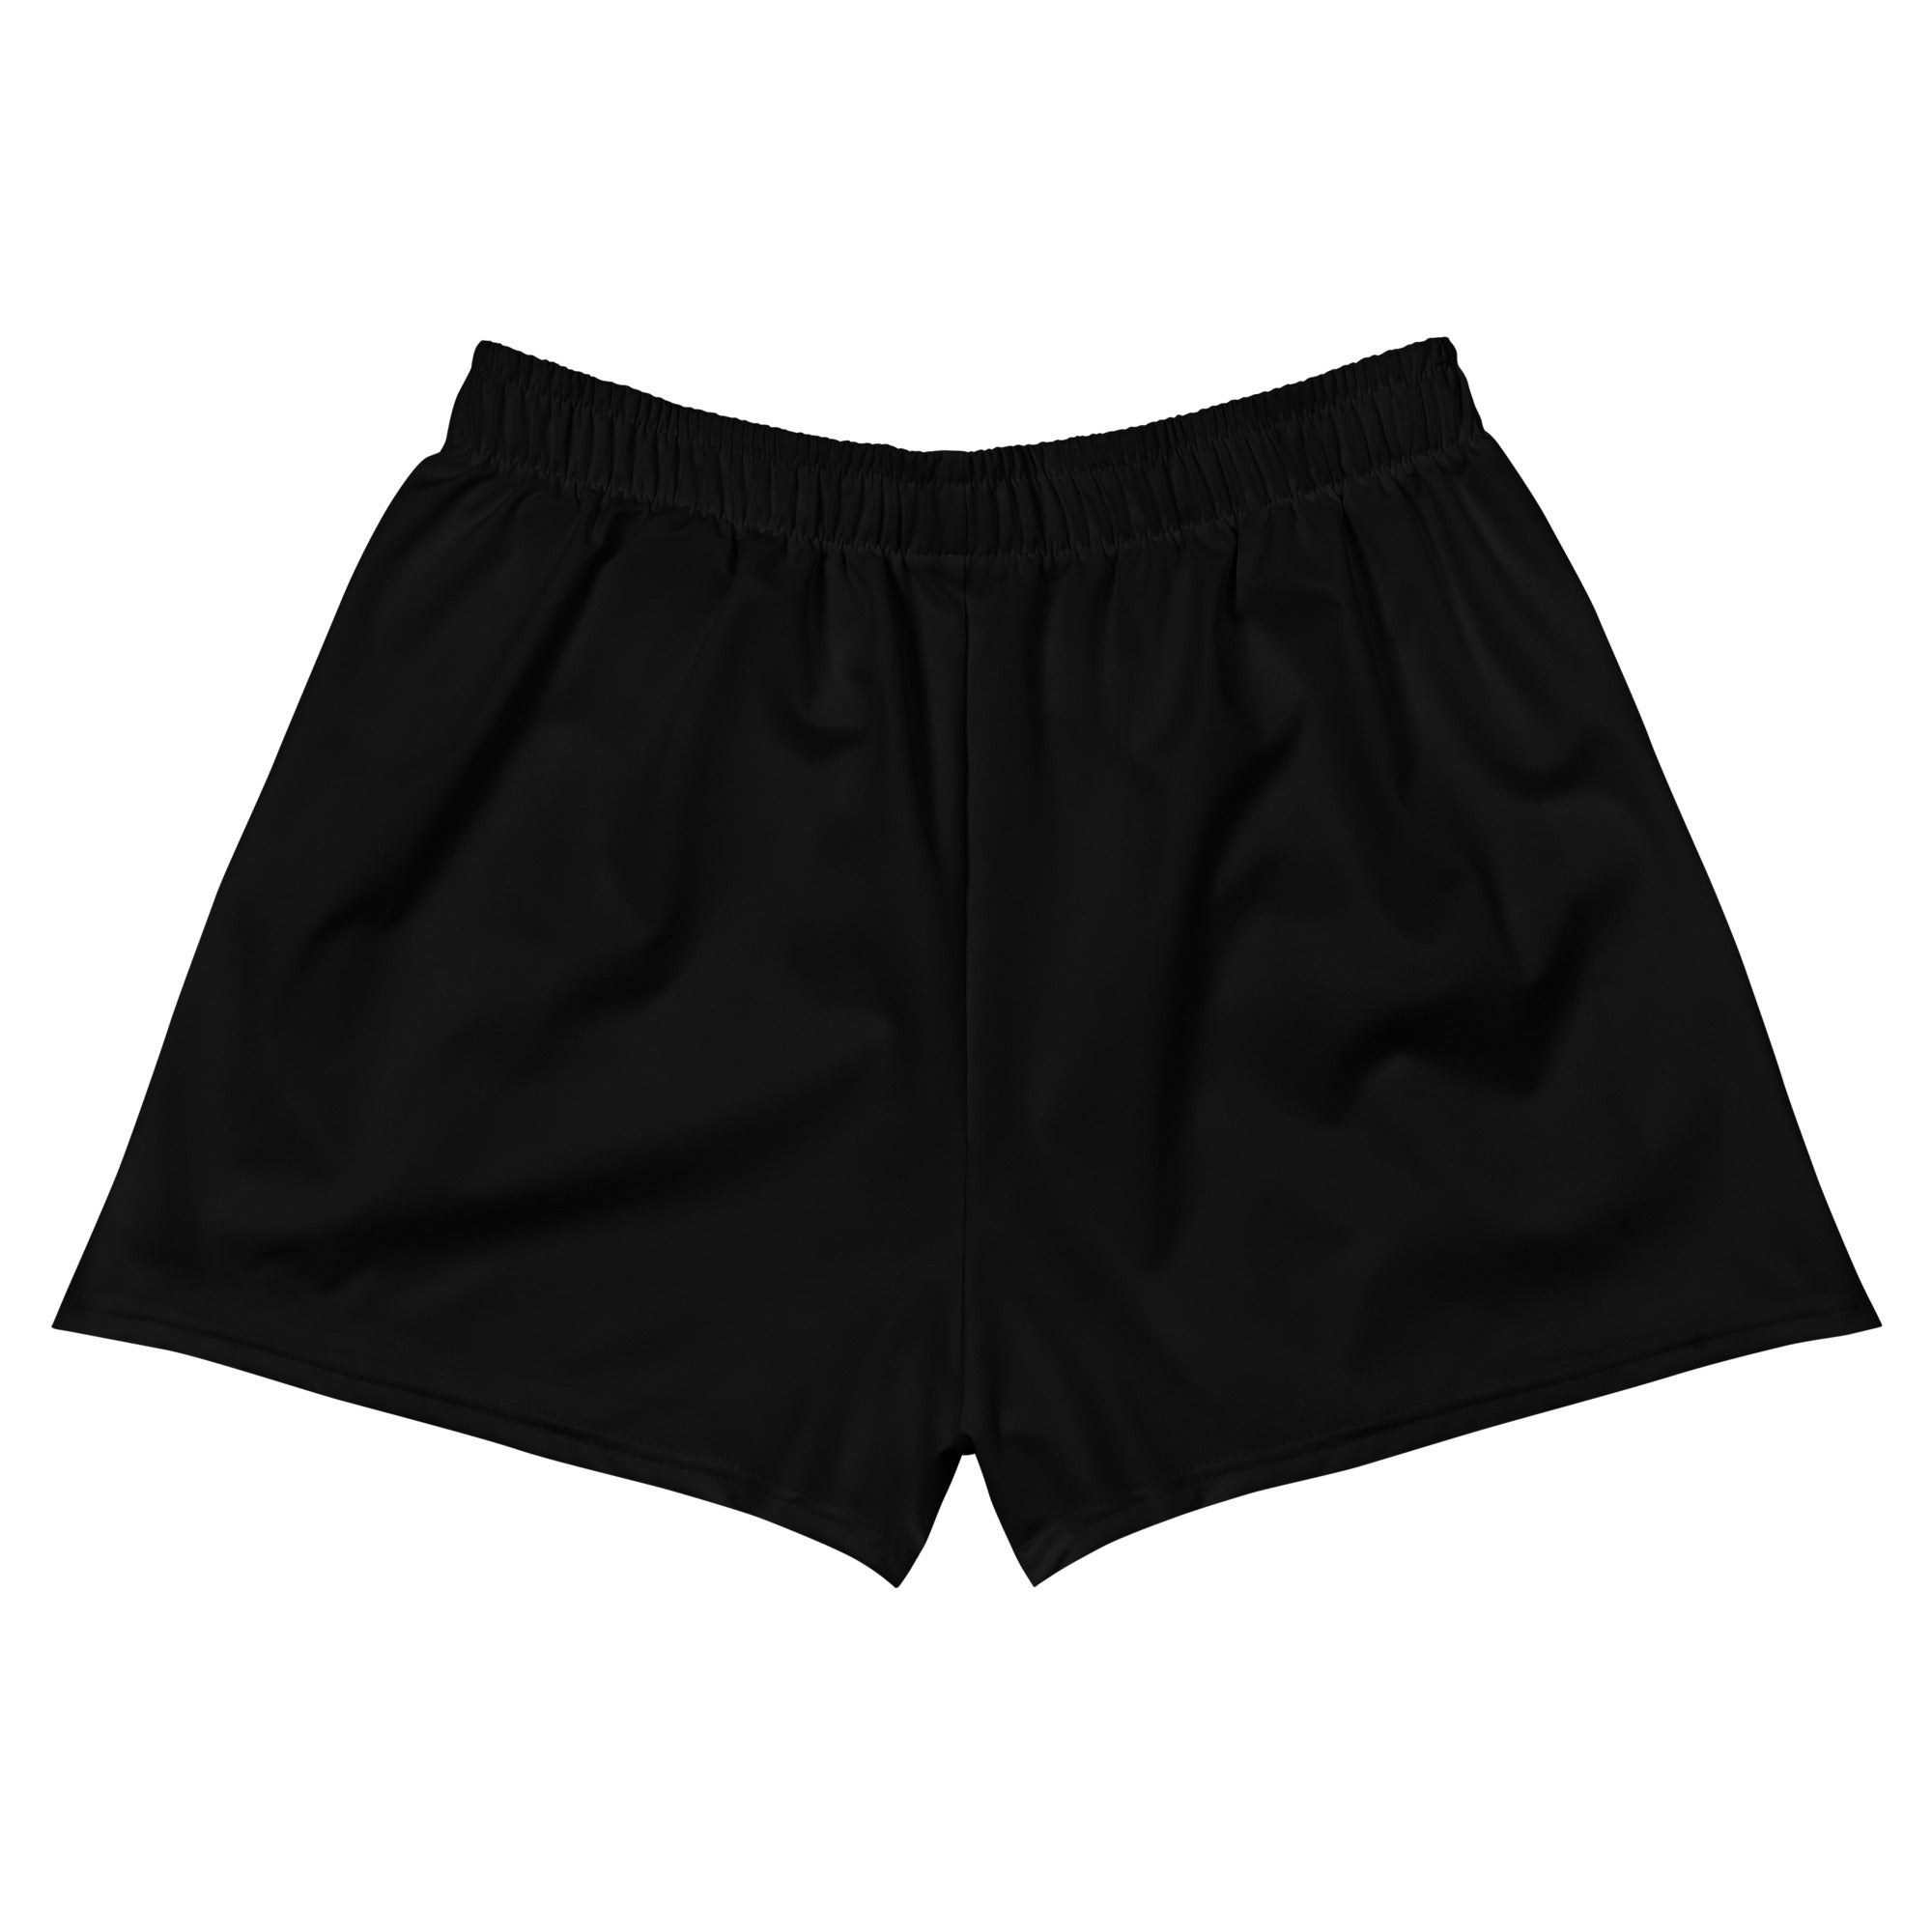 AACMSD Women’s Recycled Athletic Shorts